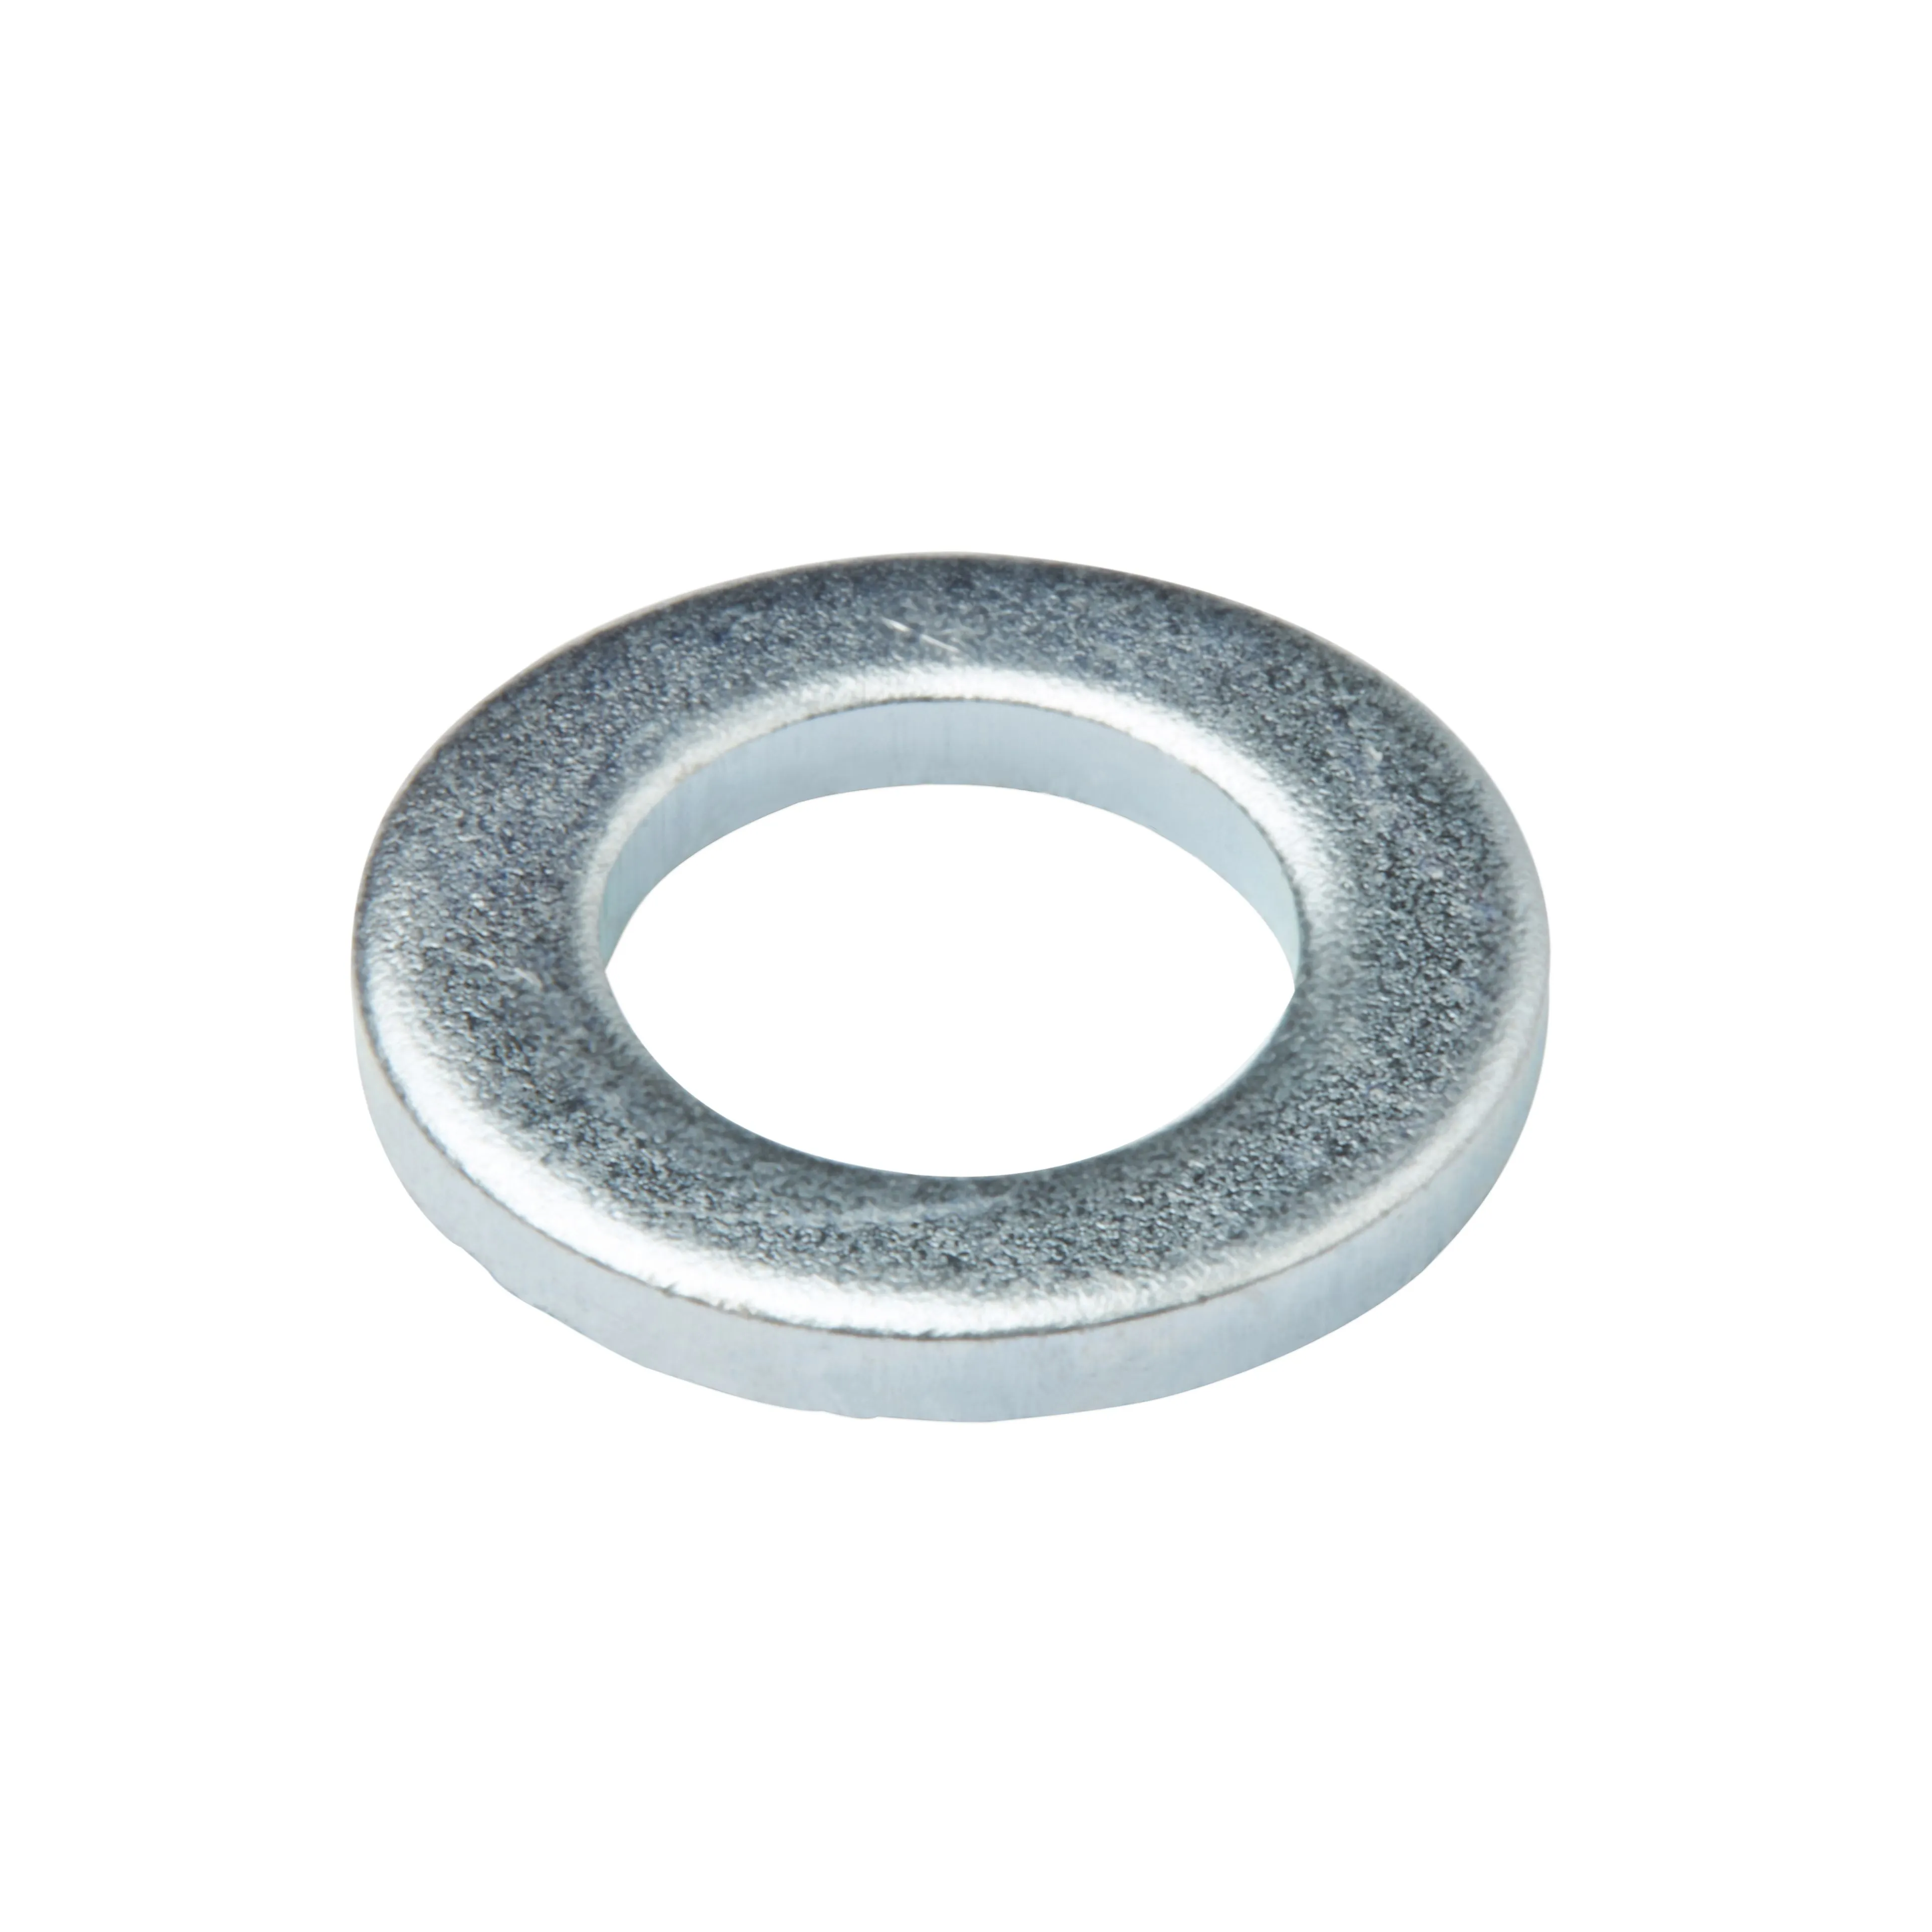 Diall M8 Carbon steel Small Flat Washer, Pack of 20